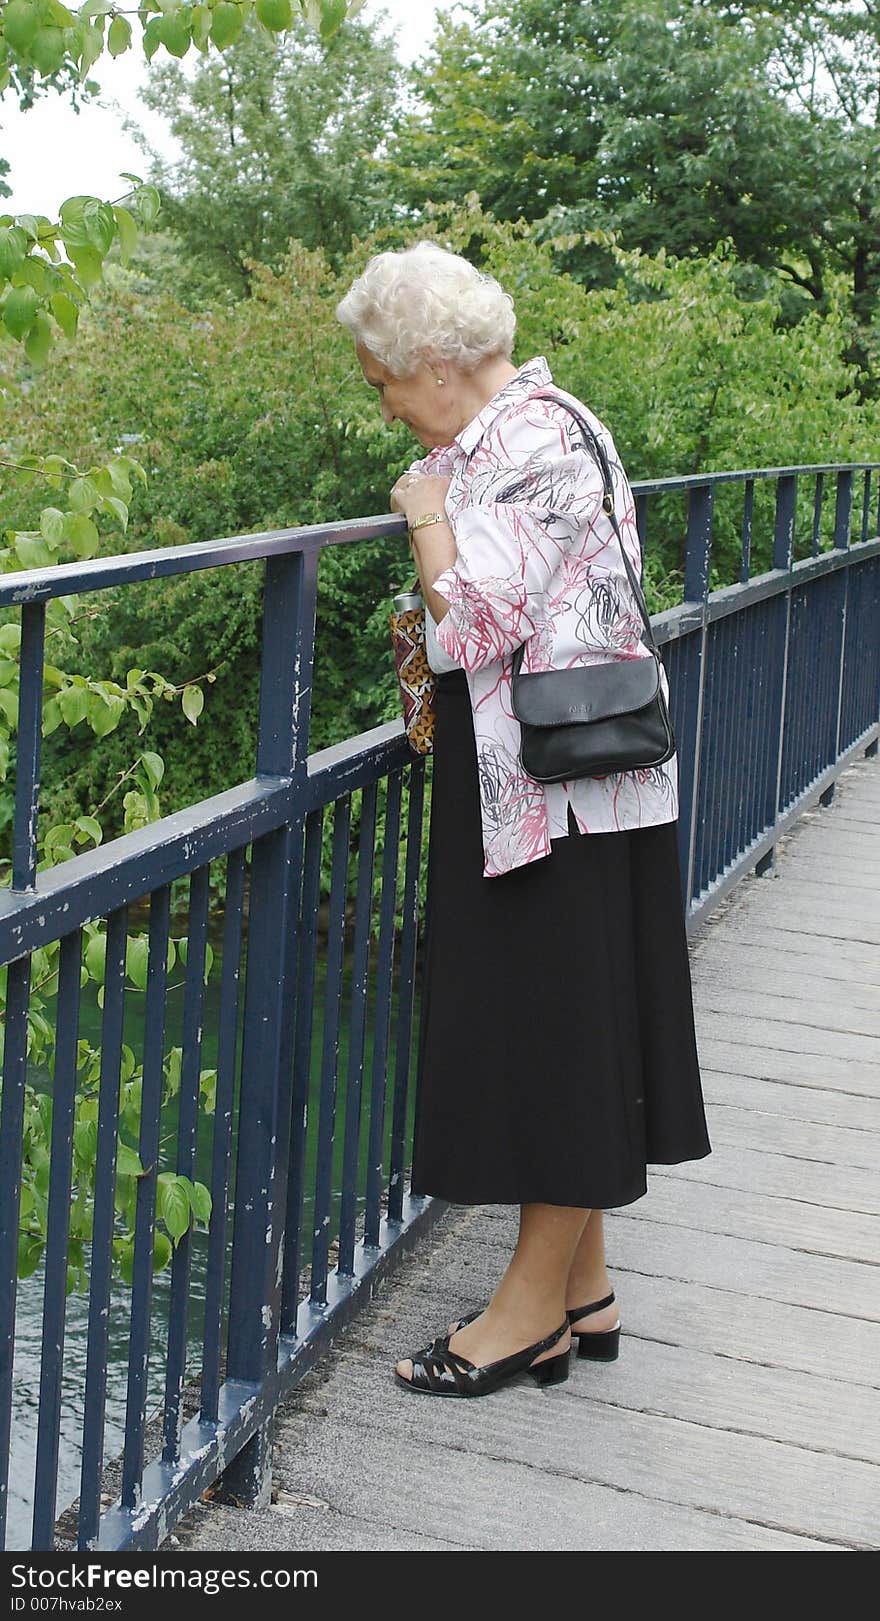 A 85 year old senior lady on a Sunday afternoon stroll in the park and looking into a river from a bridge. A 85 year old senior lady on a Sunday afternoon stroll in the park and looking into a river from a bridge